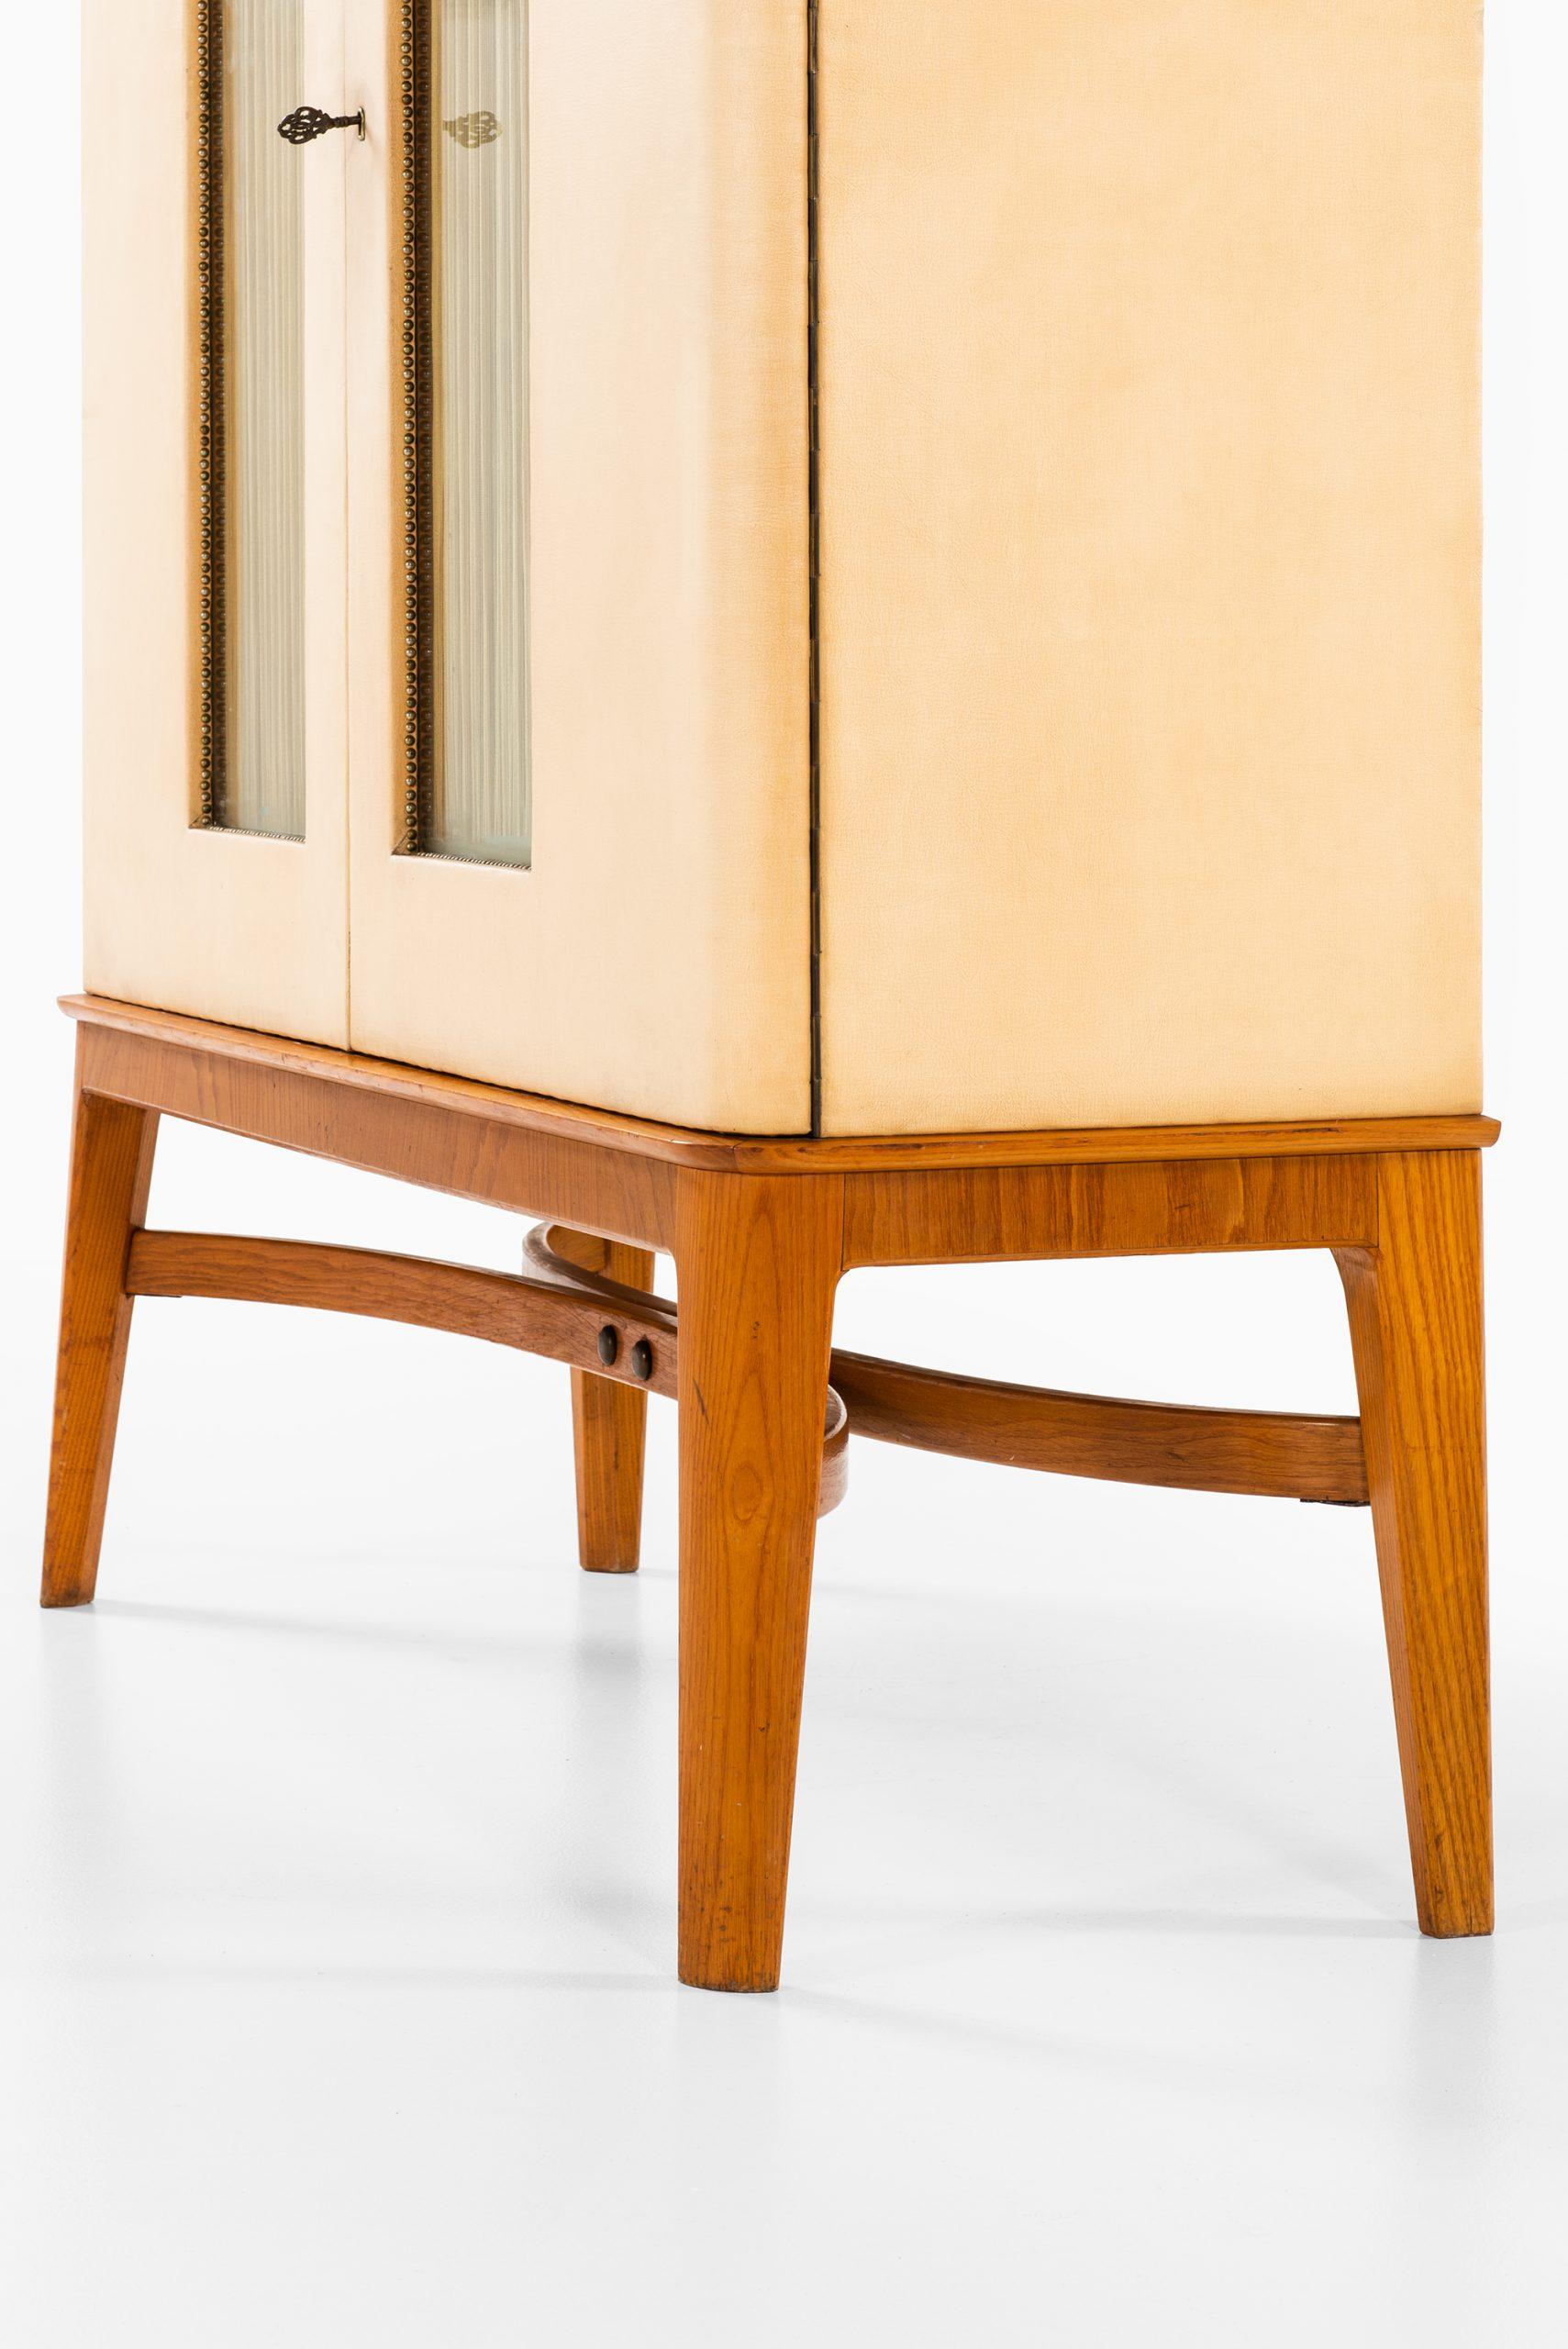 Brass Otto Schulz Cabinet Produced by Boet in Sweden For Sale